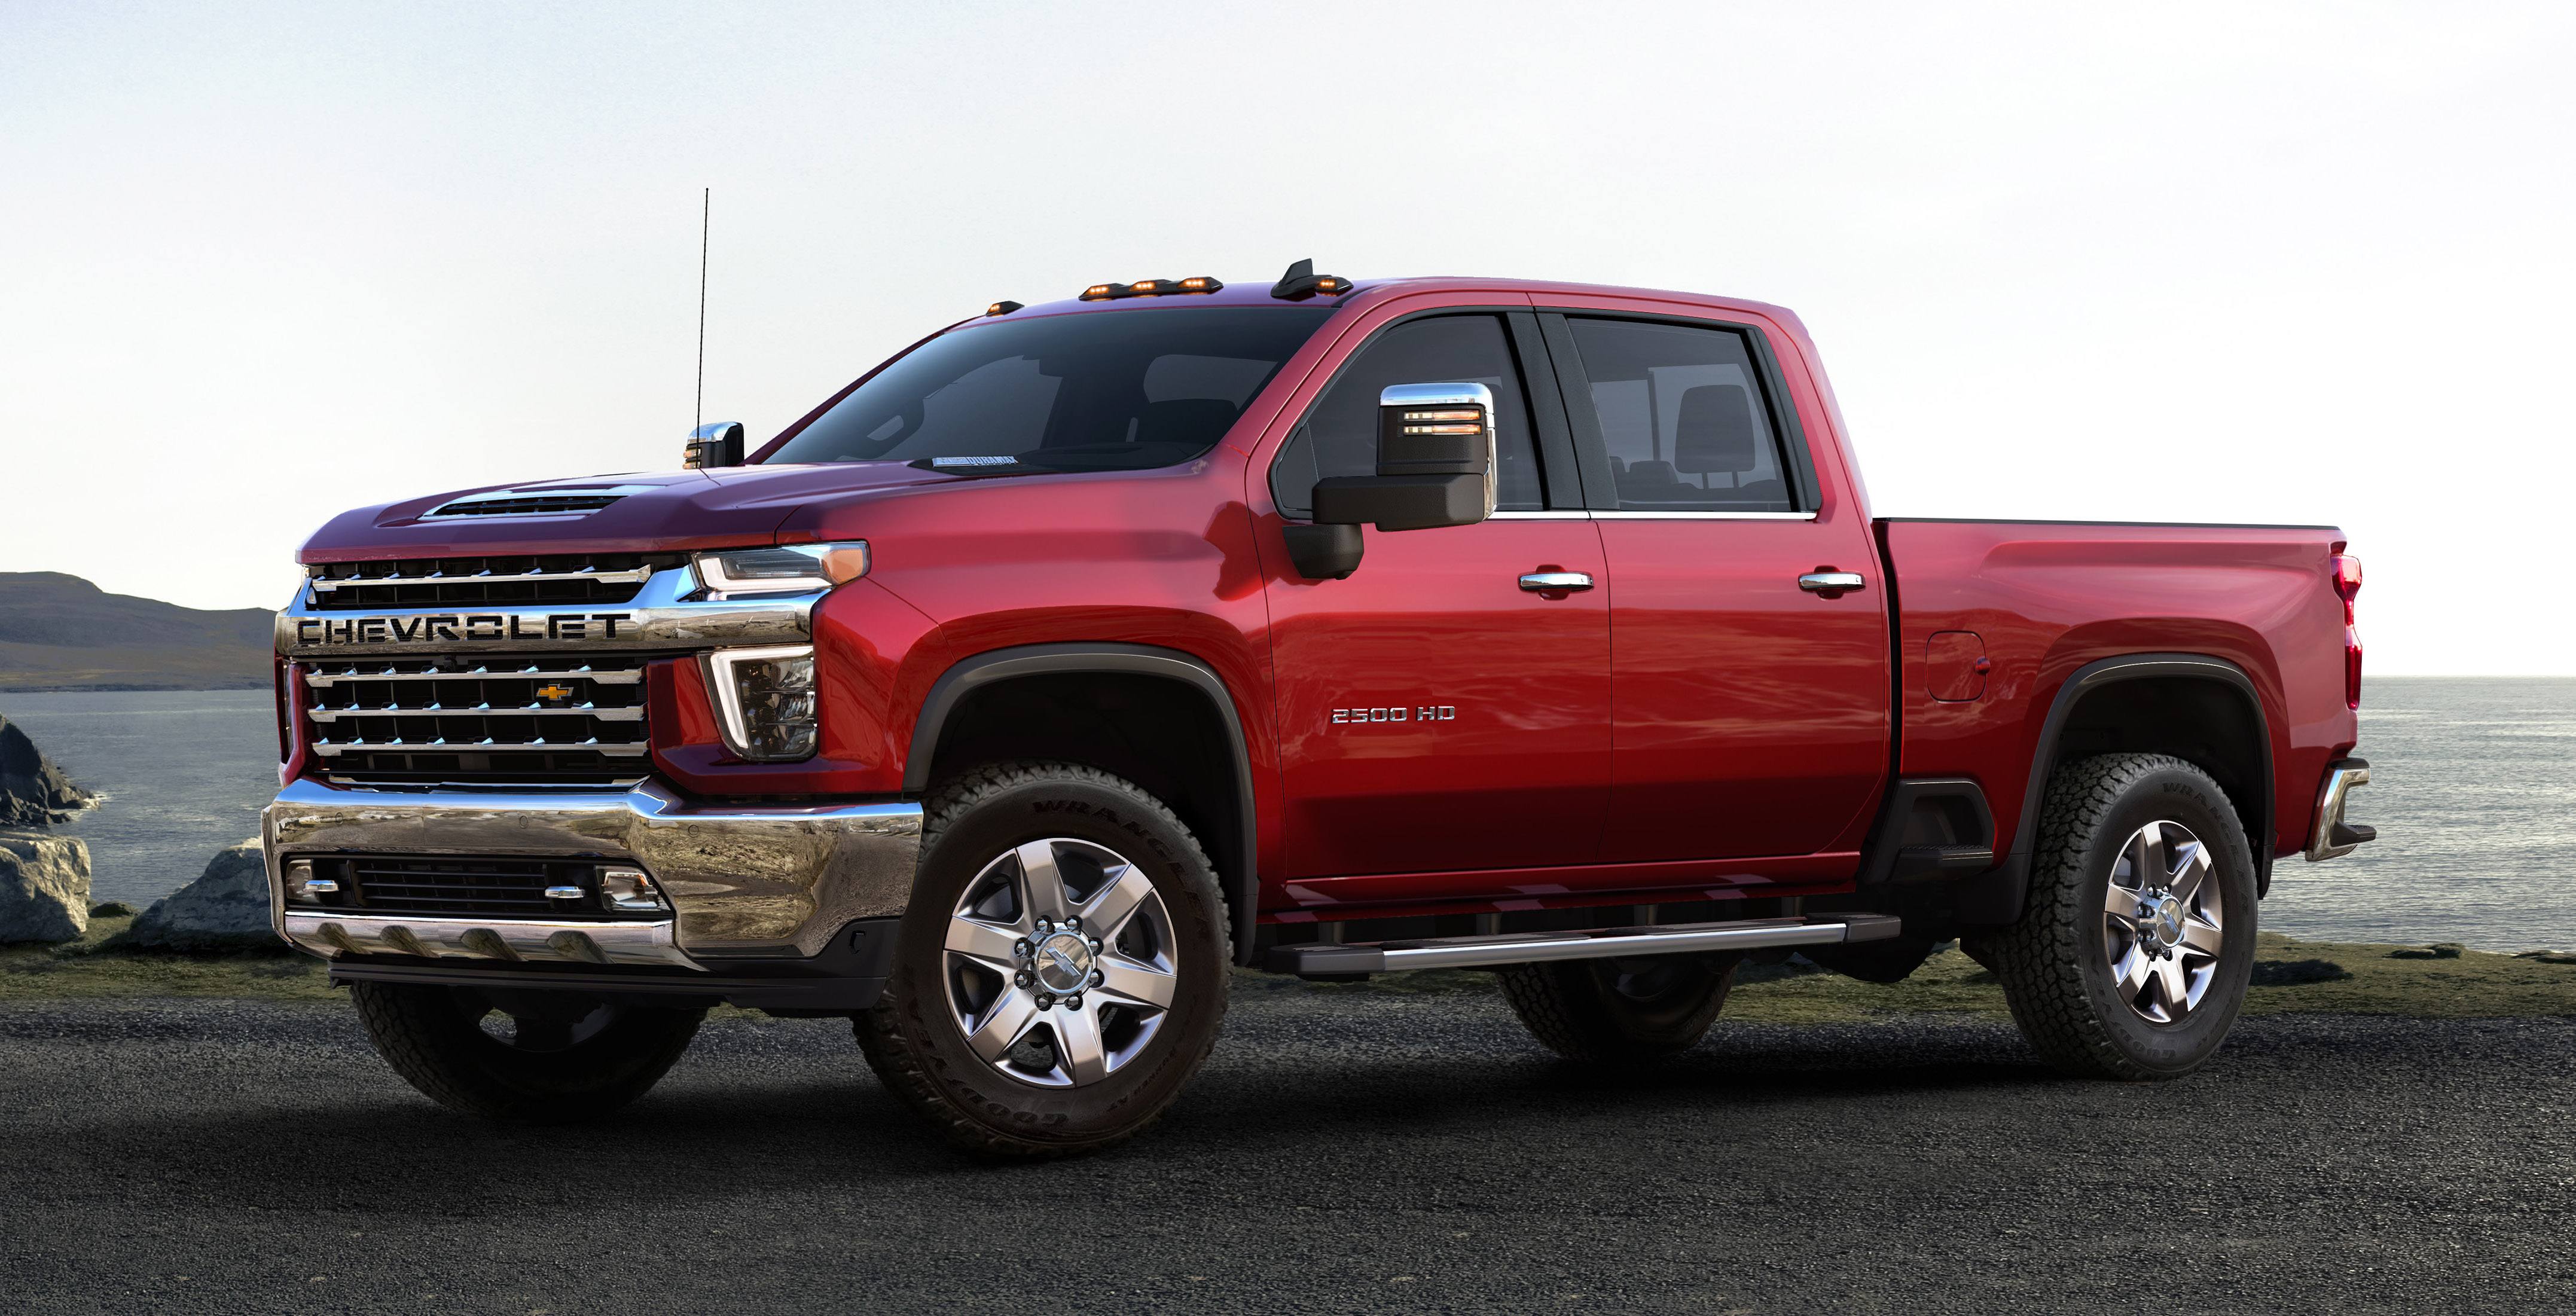 pulling-its-weight-2020-chevrolet-silverado-hd-tows-35-500lbs-off